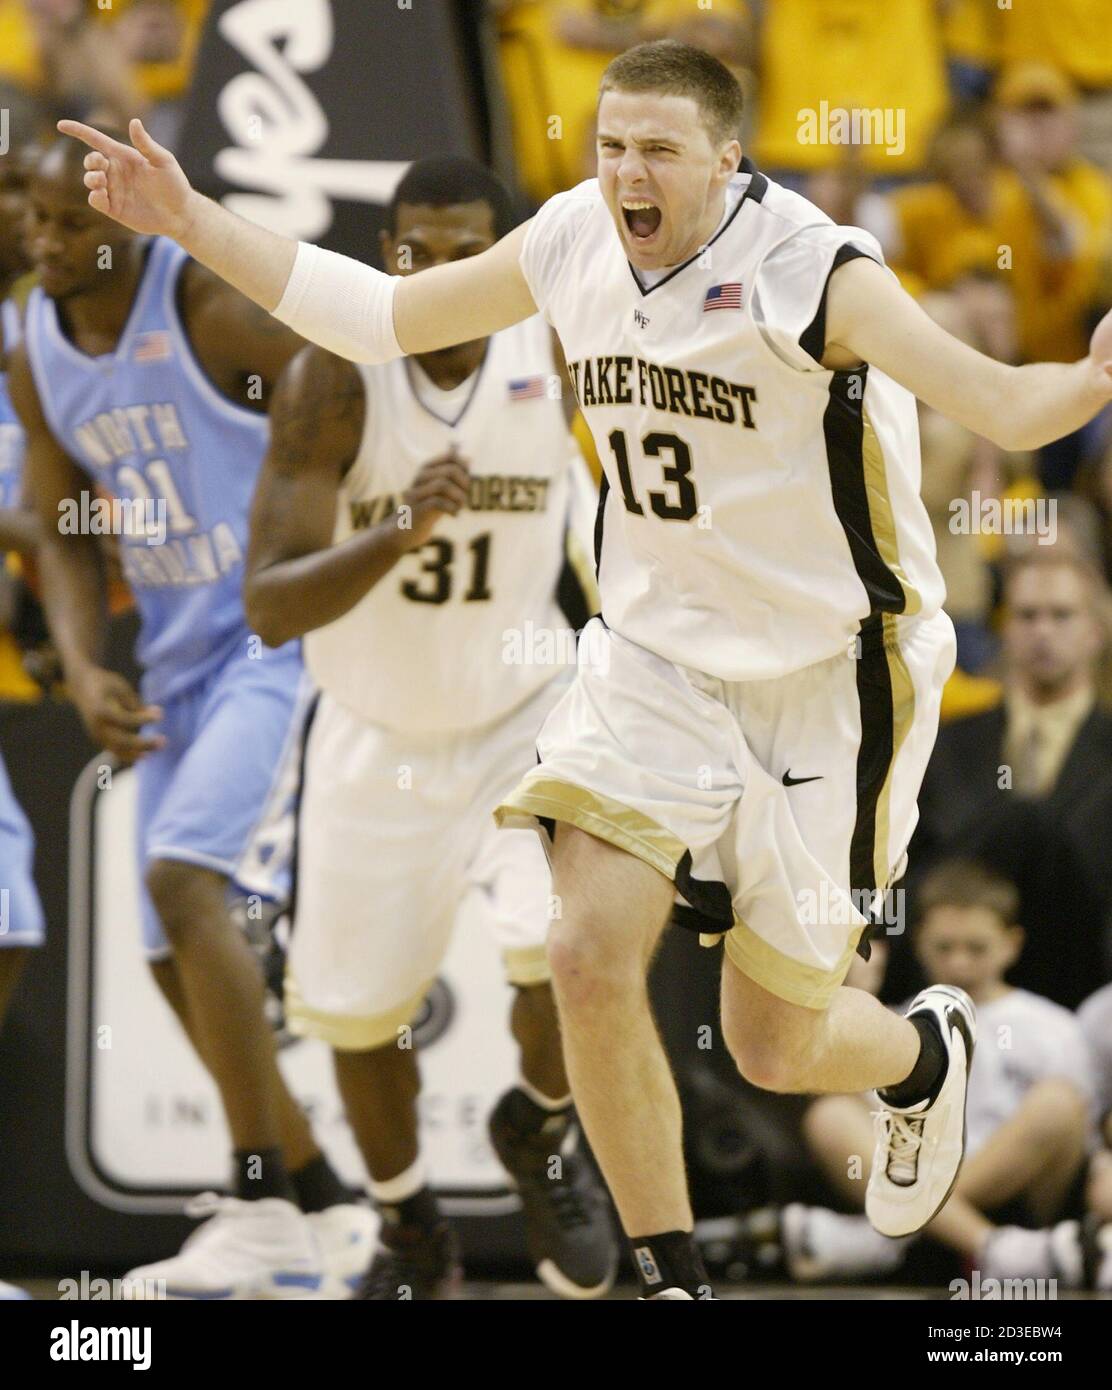 wake-forest-universitys-vytas-danelius-13-celebrates-after-hitting-a-three-point-shot-during-the-second-half-of-wake-forests-95-82-win-over-the-university-of-north-carolina-in-winston-salem-north-carolina-january-15-2005-reutersellen-ozier-elo-2D3EBW4.jpg